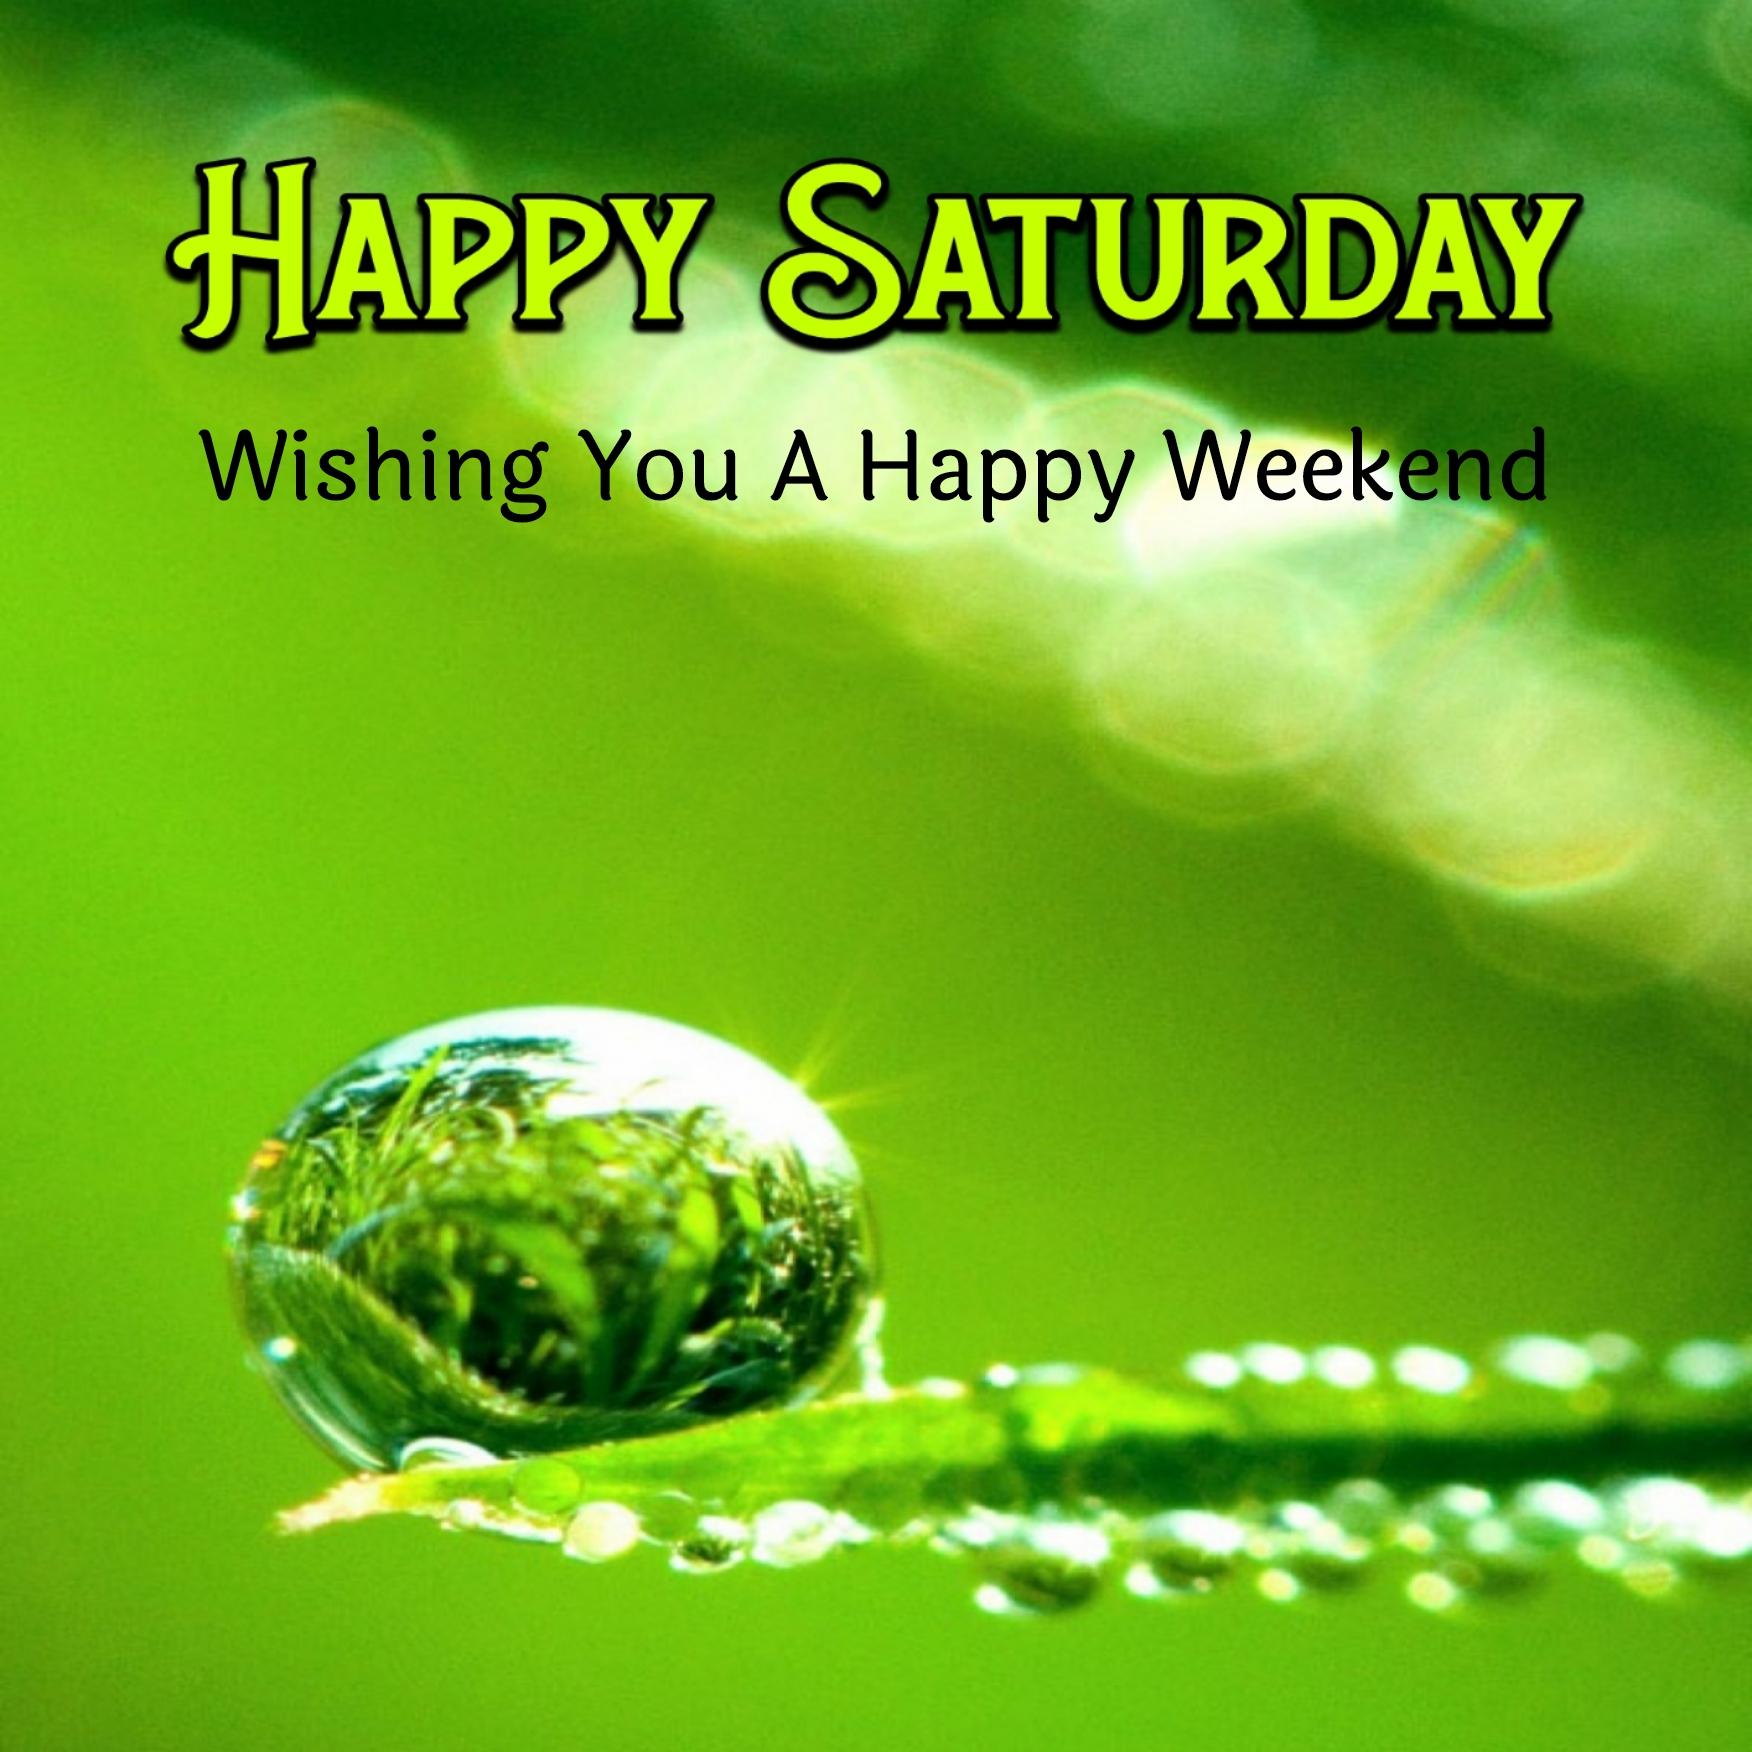 Happy Saturday Wishing You A Happy Weekend Images